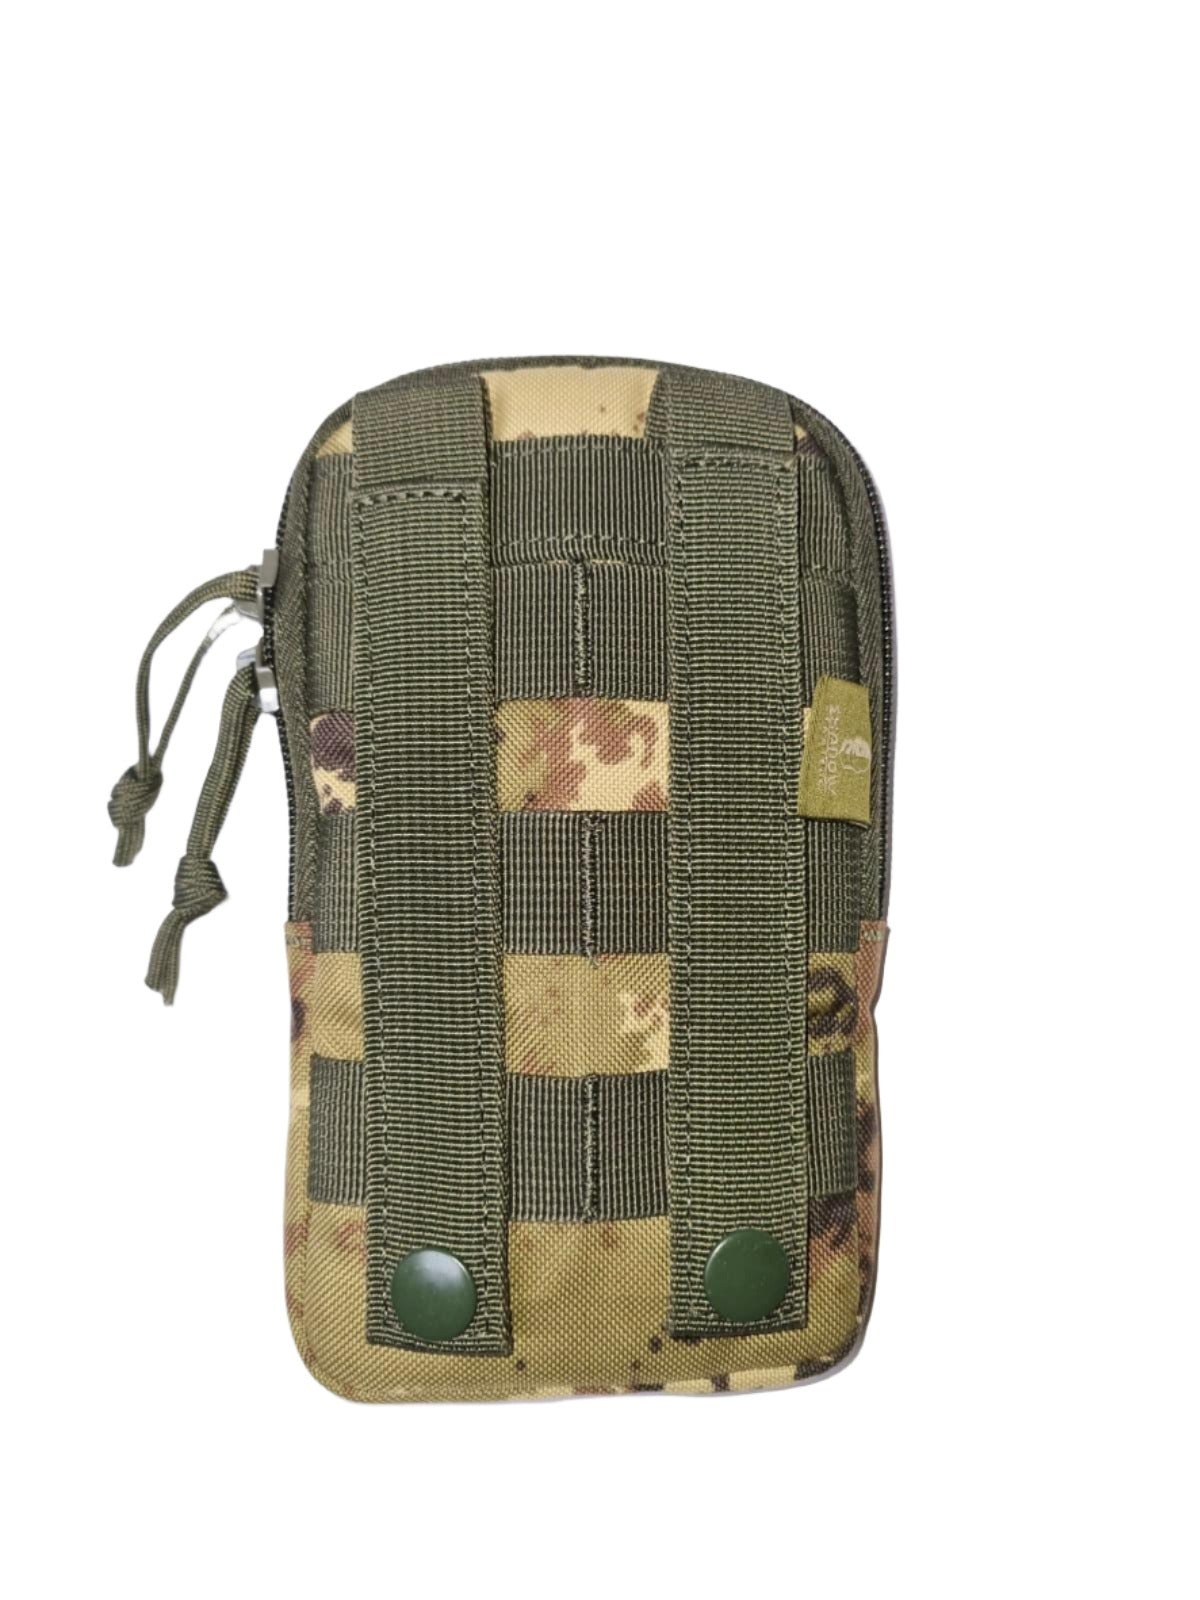 SHS-1038-Cell Phone Pouch with Molle loop-VEGETATO